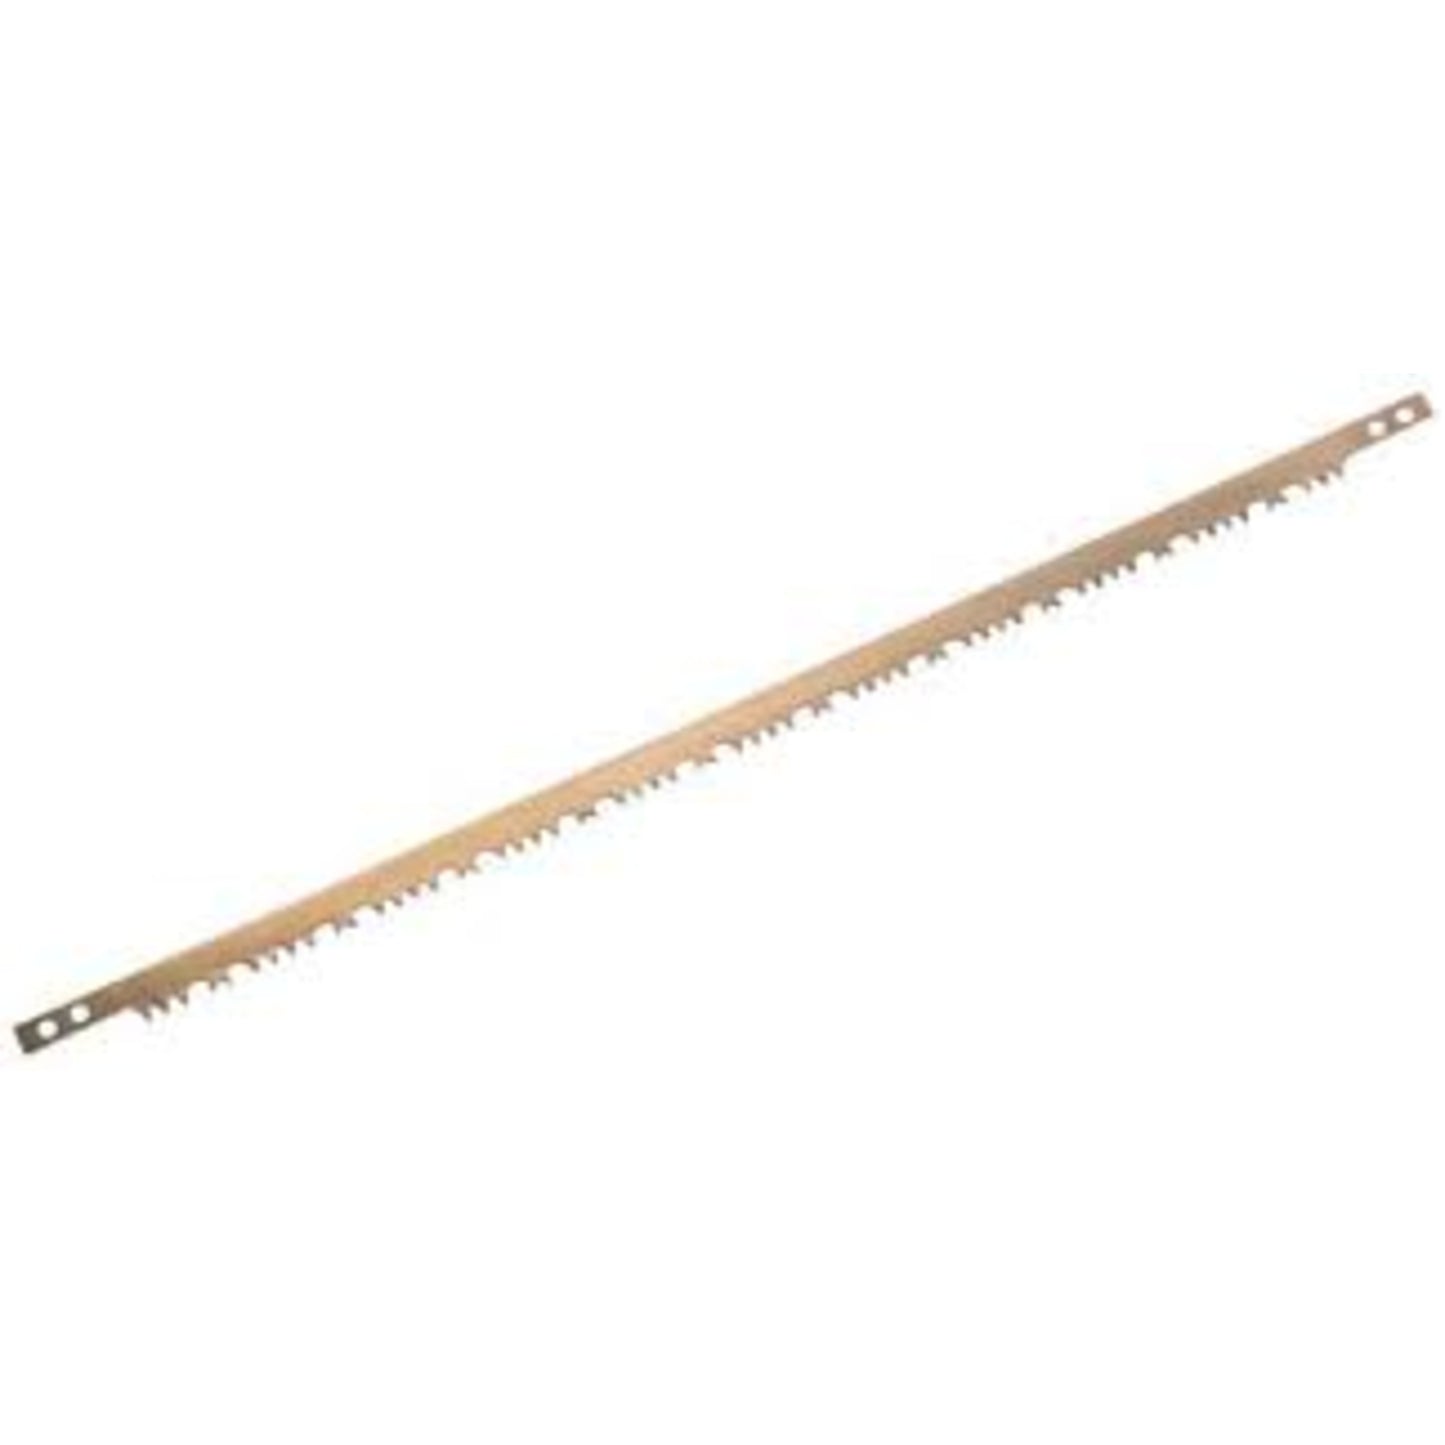 Bahco 23-21, 21" Bow Saw Replacement Blade For Green Wood